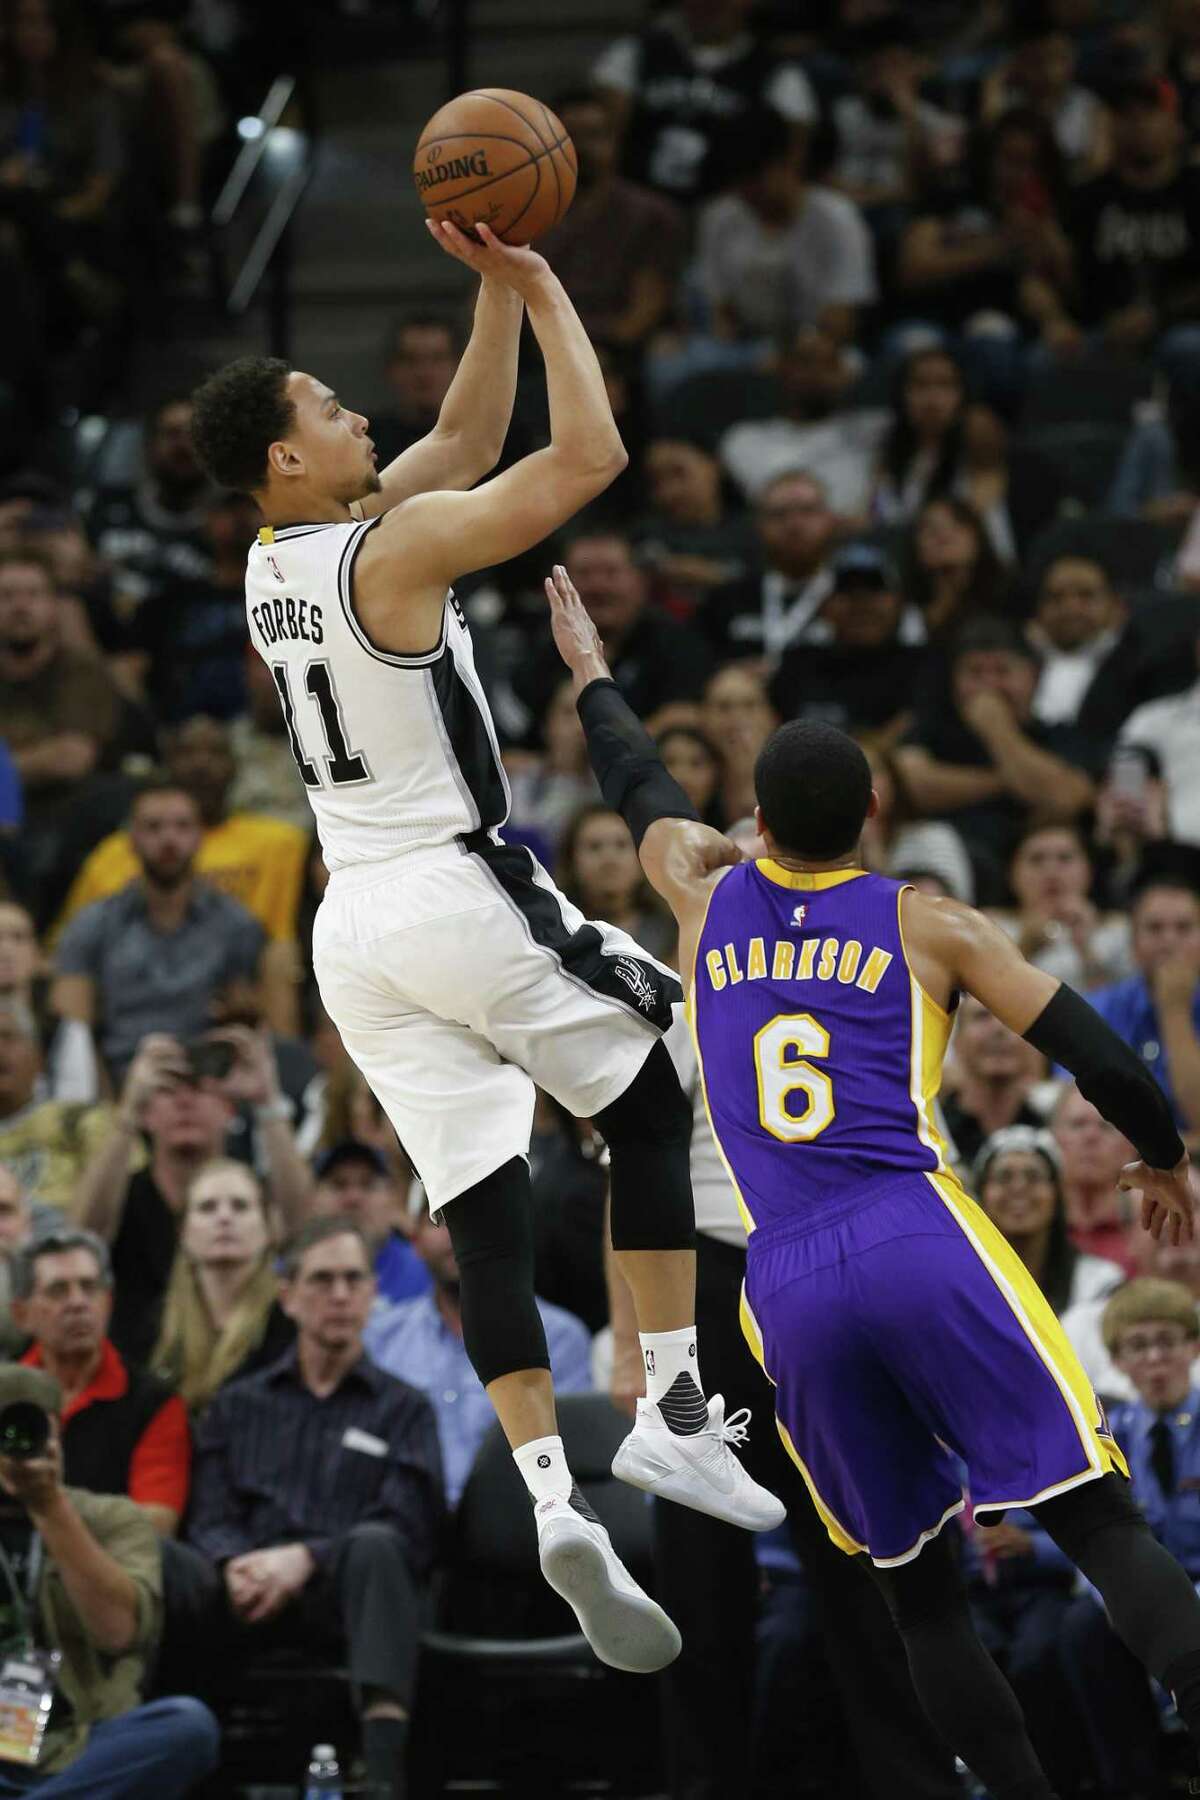 Spurs’ Bryn Forbes shoots against the Los Angeles Lakers’ Jordan Clarkson (6) during their game at the AT&T Center on April 5, 2017.